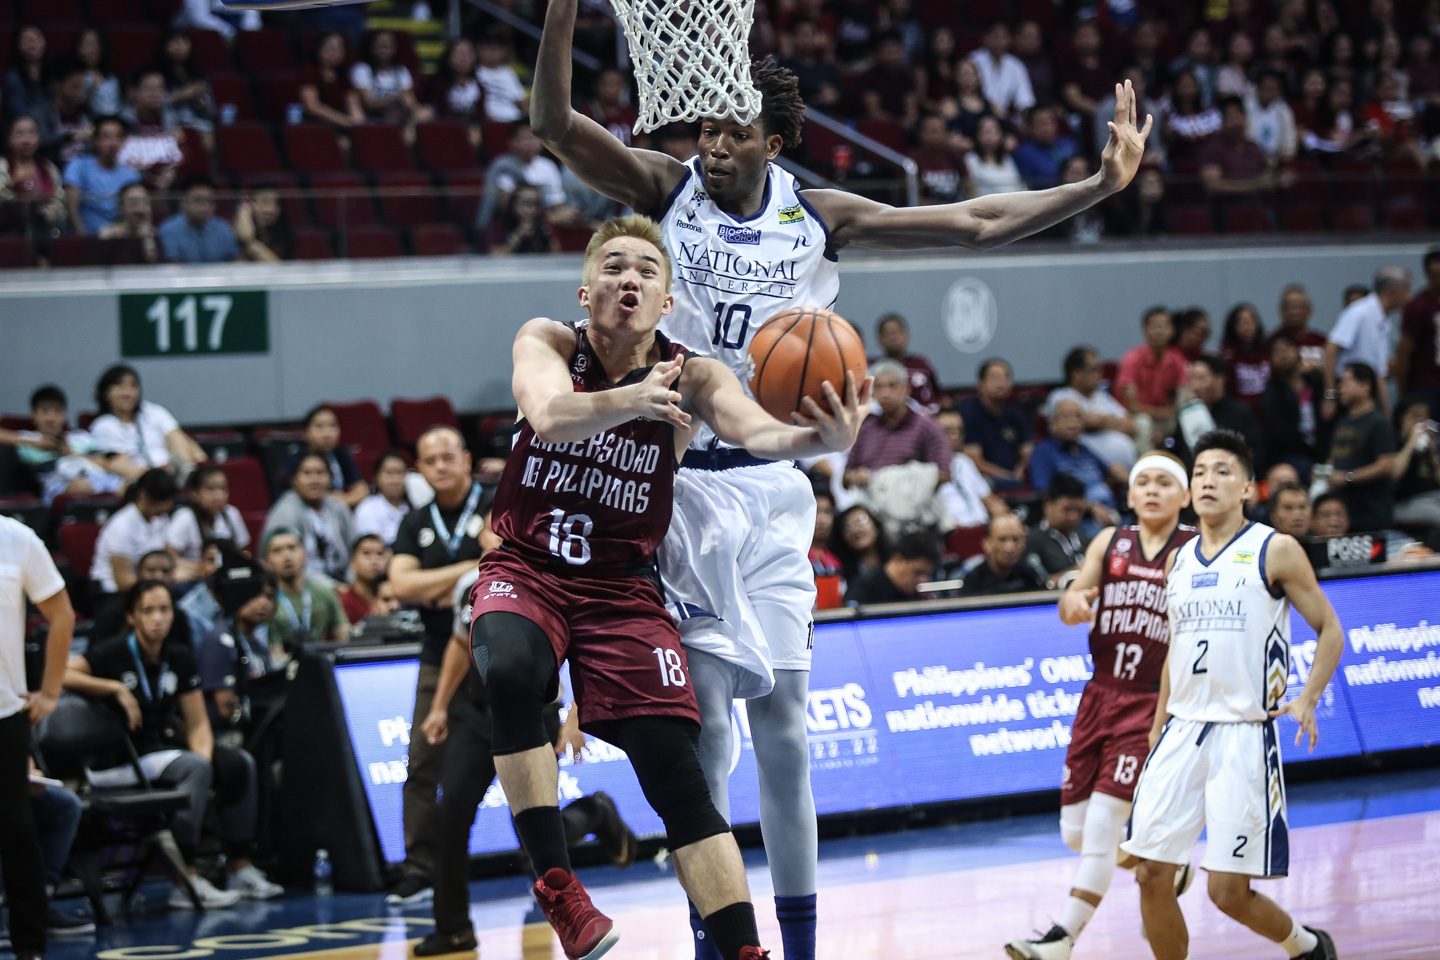 New hairdos can’t stop UP Fighting Maroons downward spiral